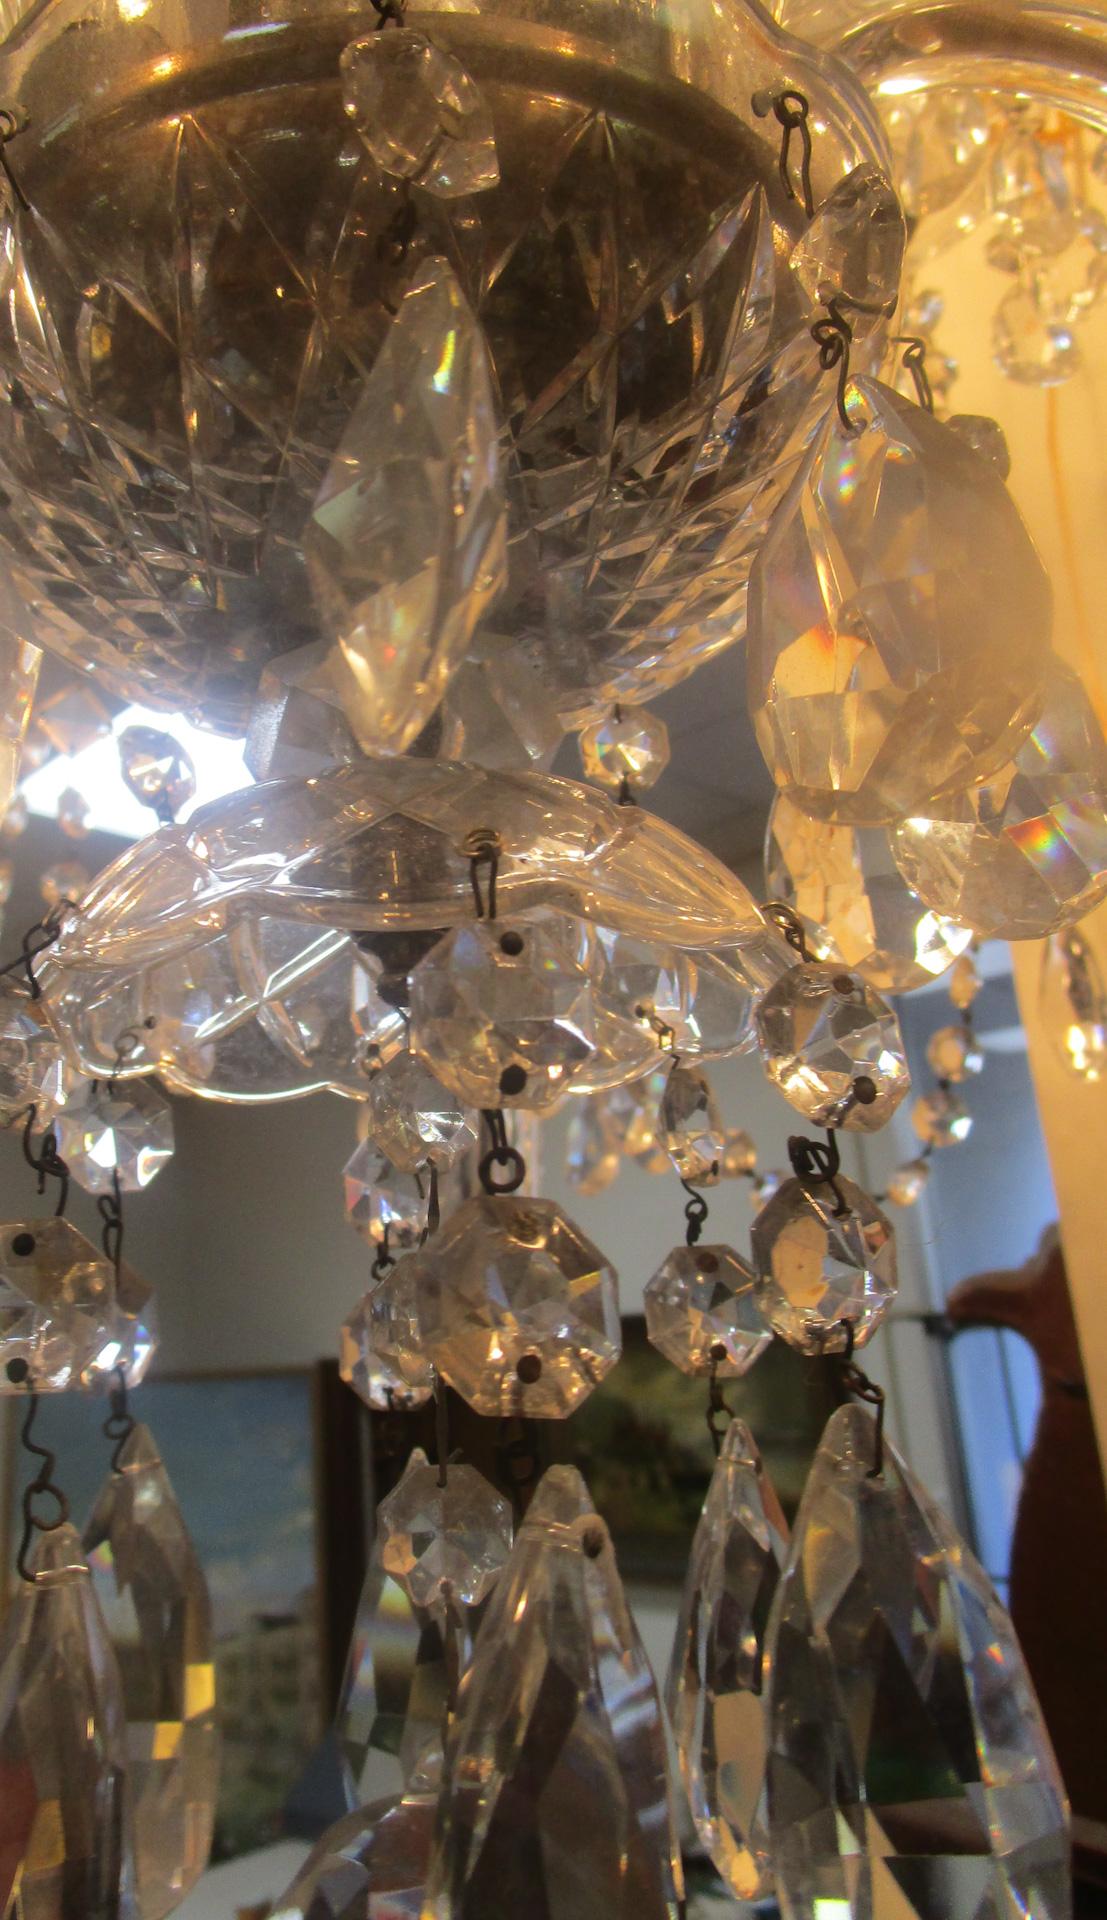 Exquisite large size well proportioned crystal English chandelier featuring ten graceful notched arms with scored double scalloped bobeche, elegant bulbous center column, two bowls and top canopy, tear drop prisms, crystal swags throughout and round